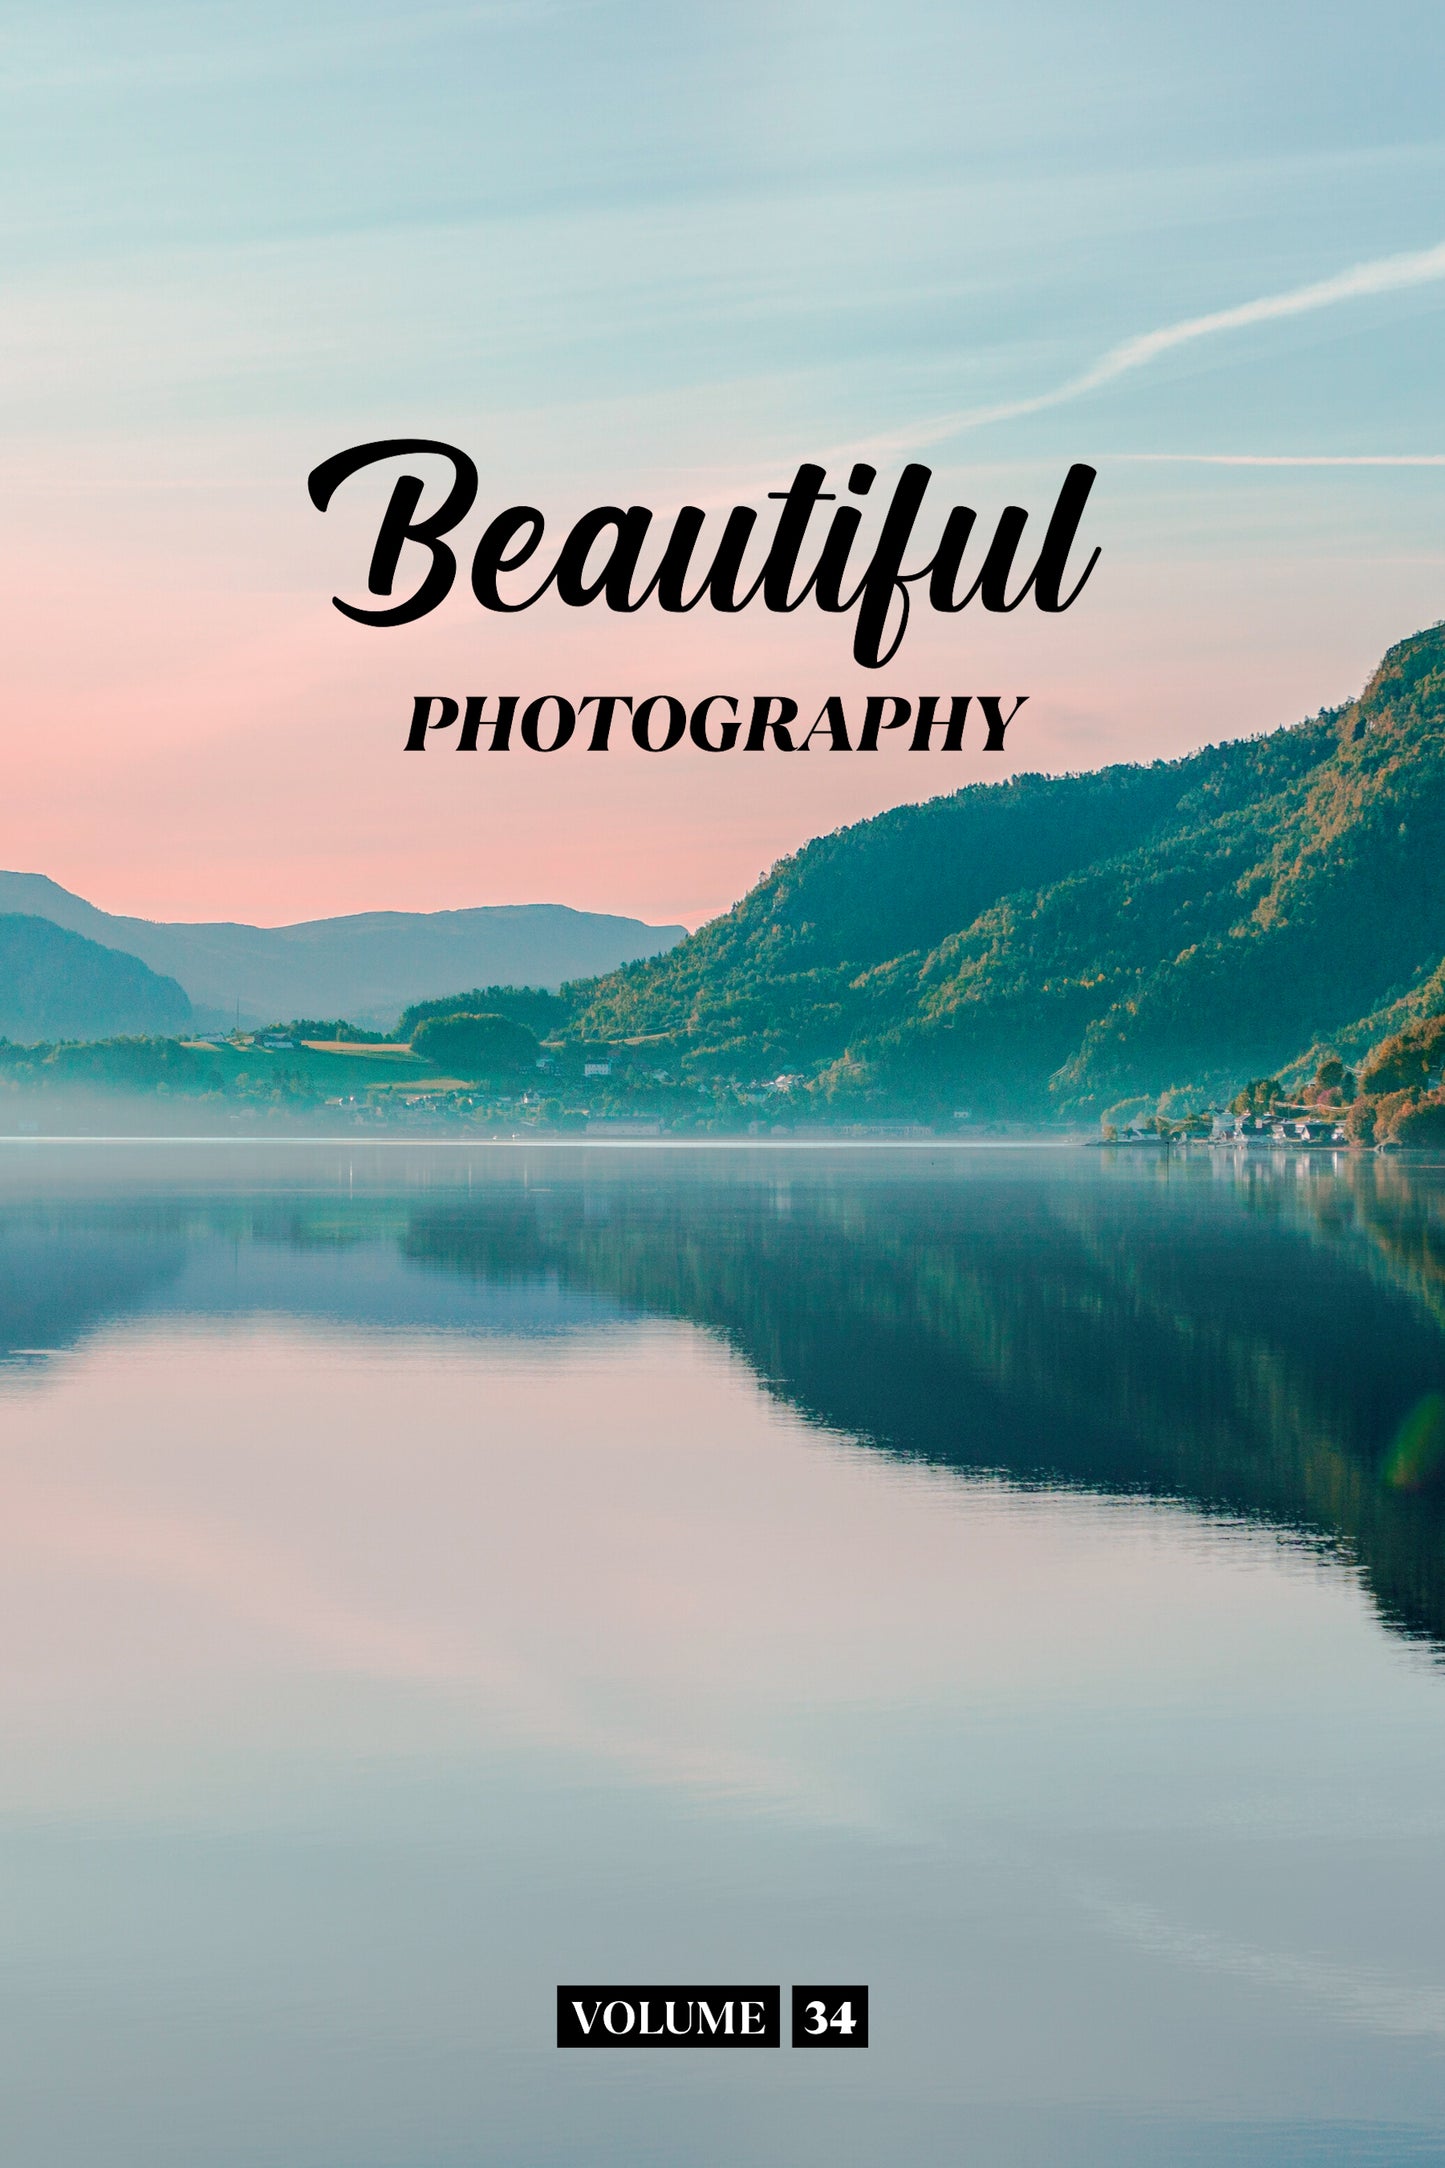 Beautiful Photography Volume 34 (Physical Book Pre-Order)